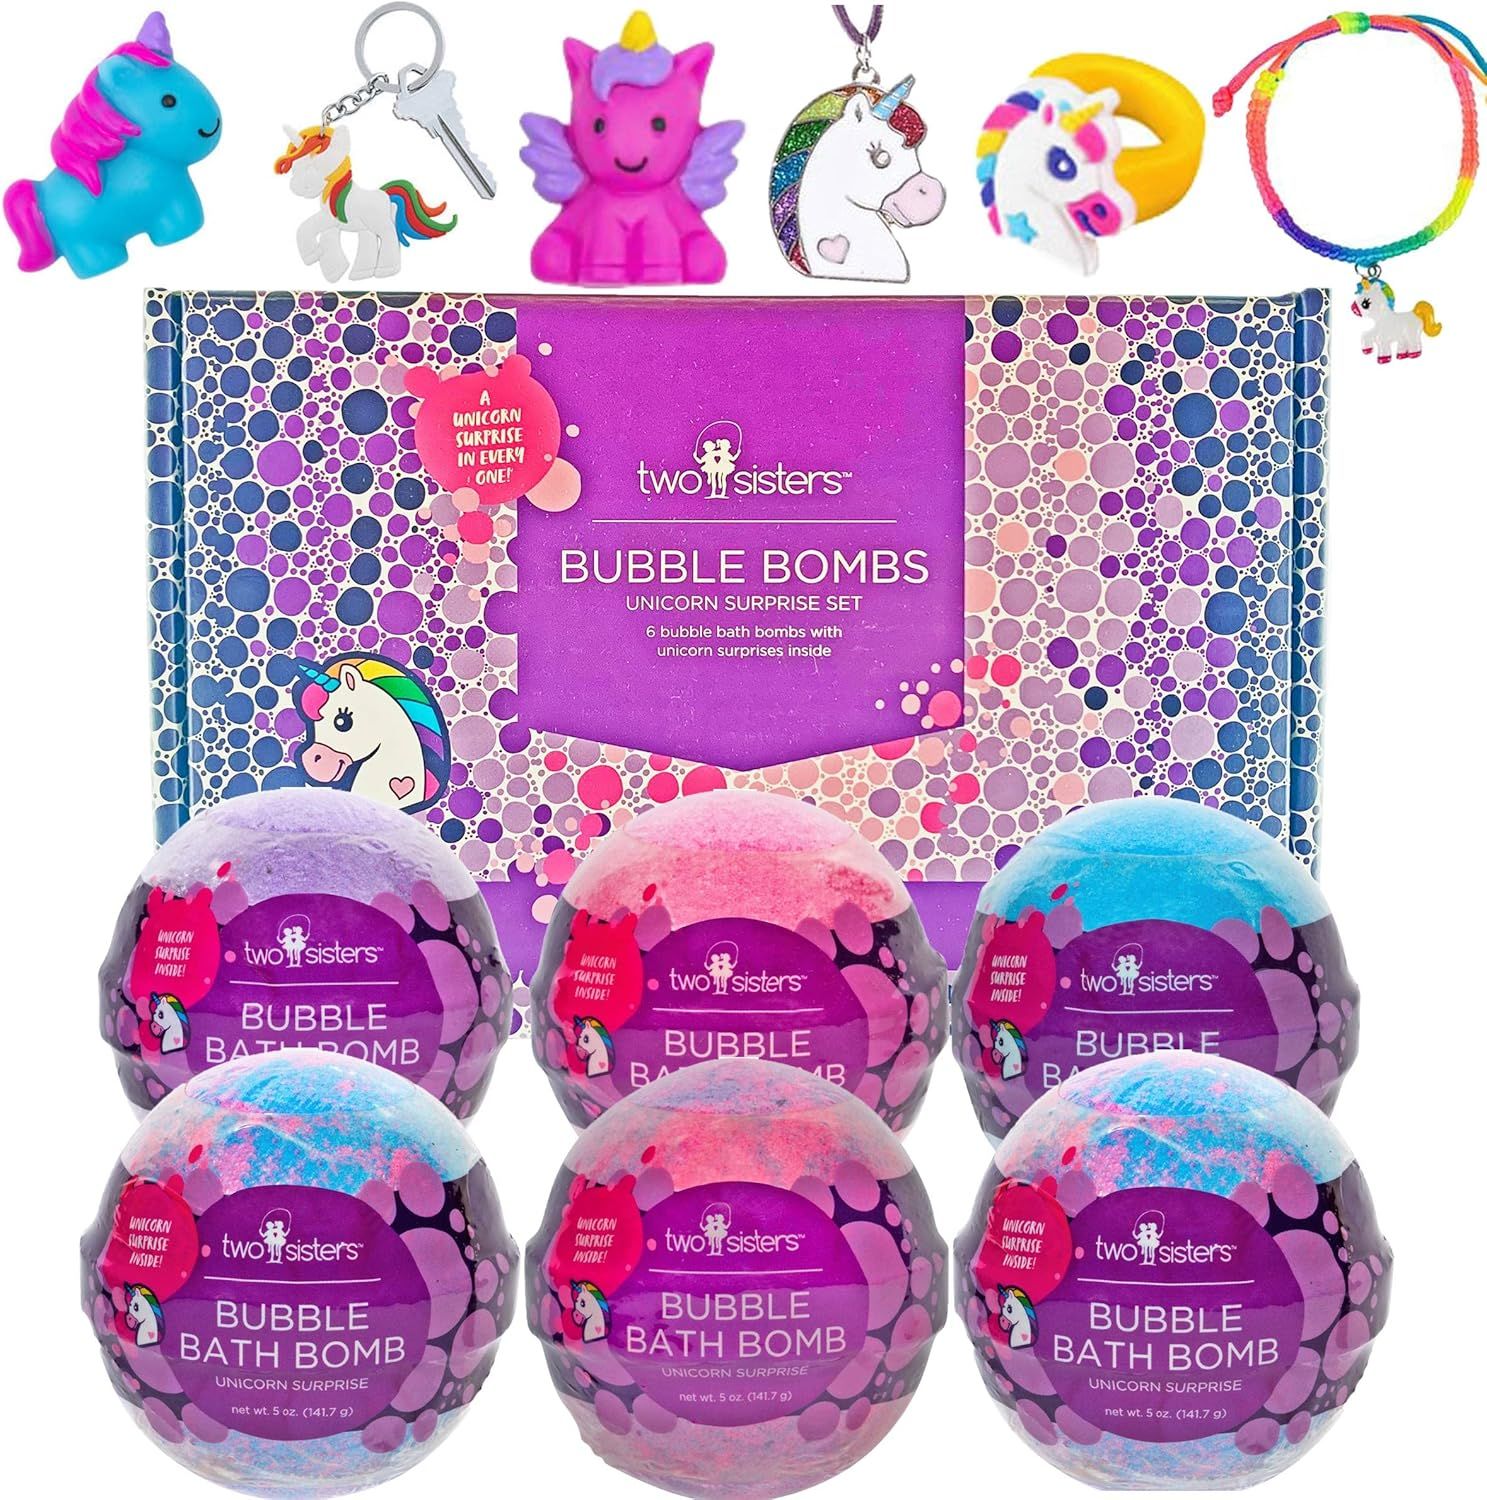 Two Sisters Bath Bombs for Kids with Surprise Toys Inside, 6 Bubble Bath Bombs with Hidden Unicorn T | Amazon (US)